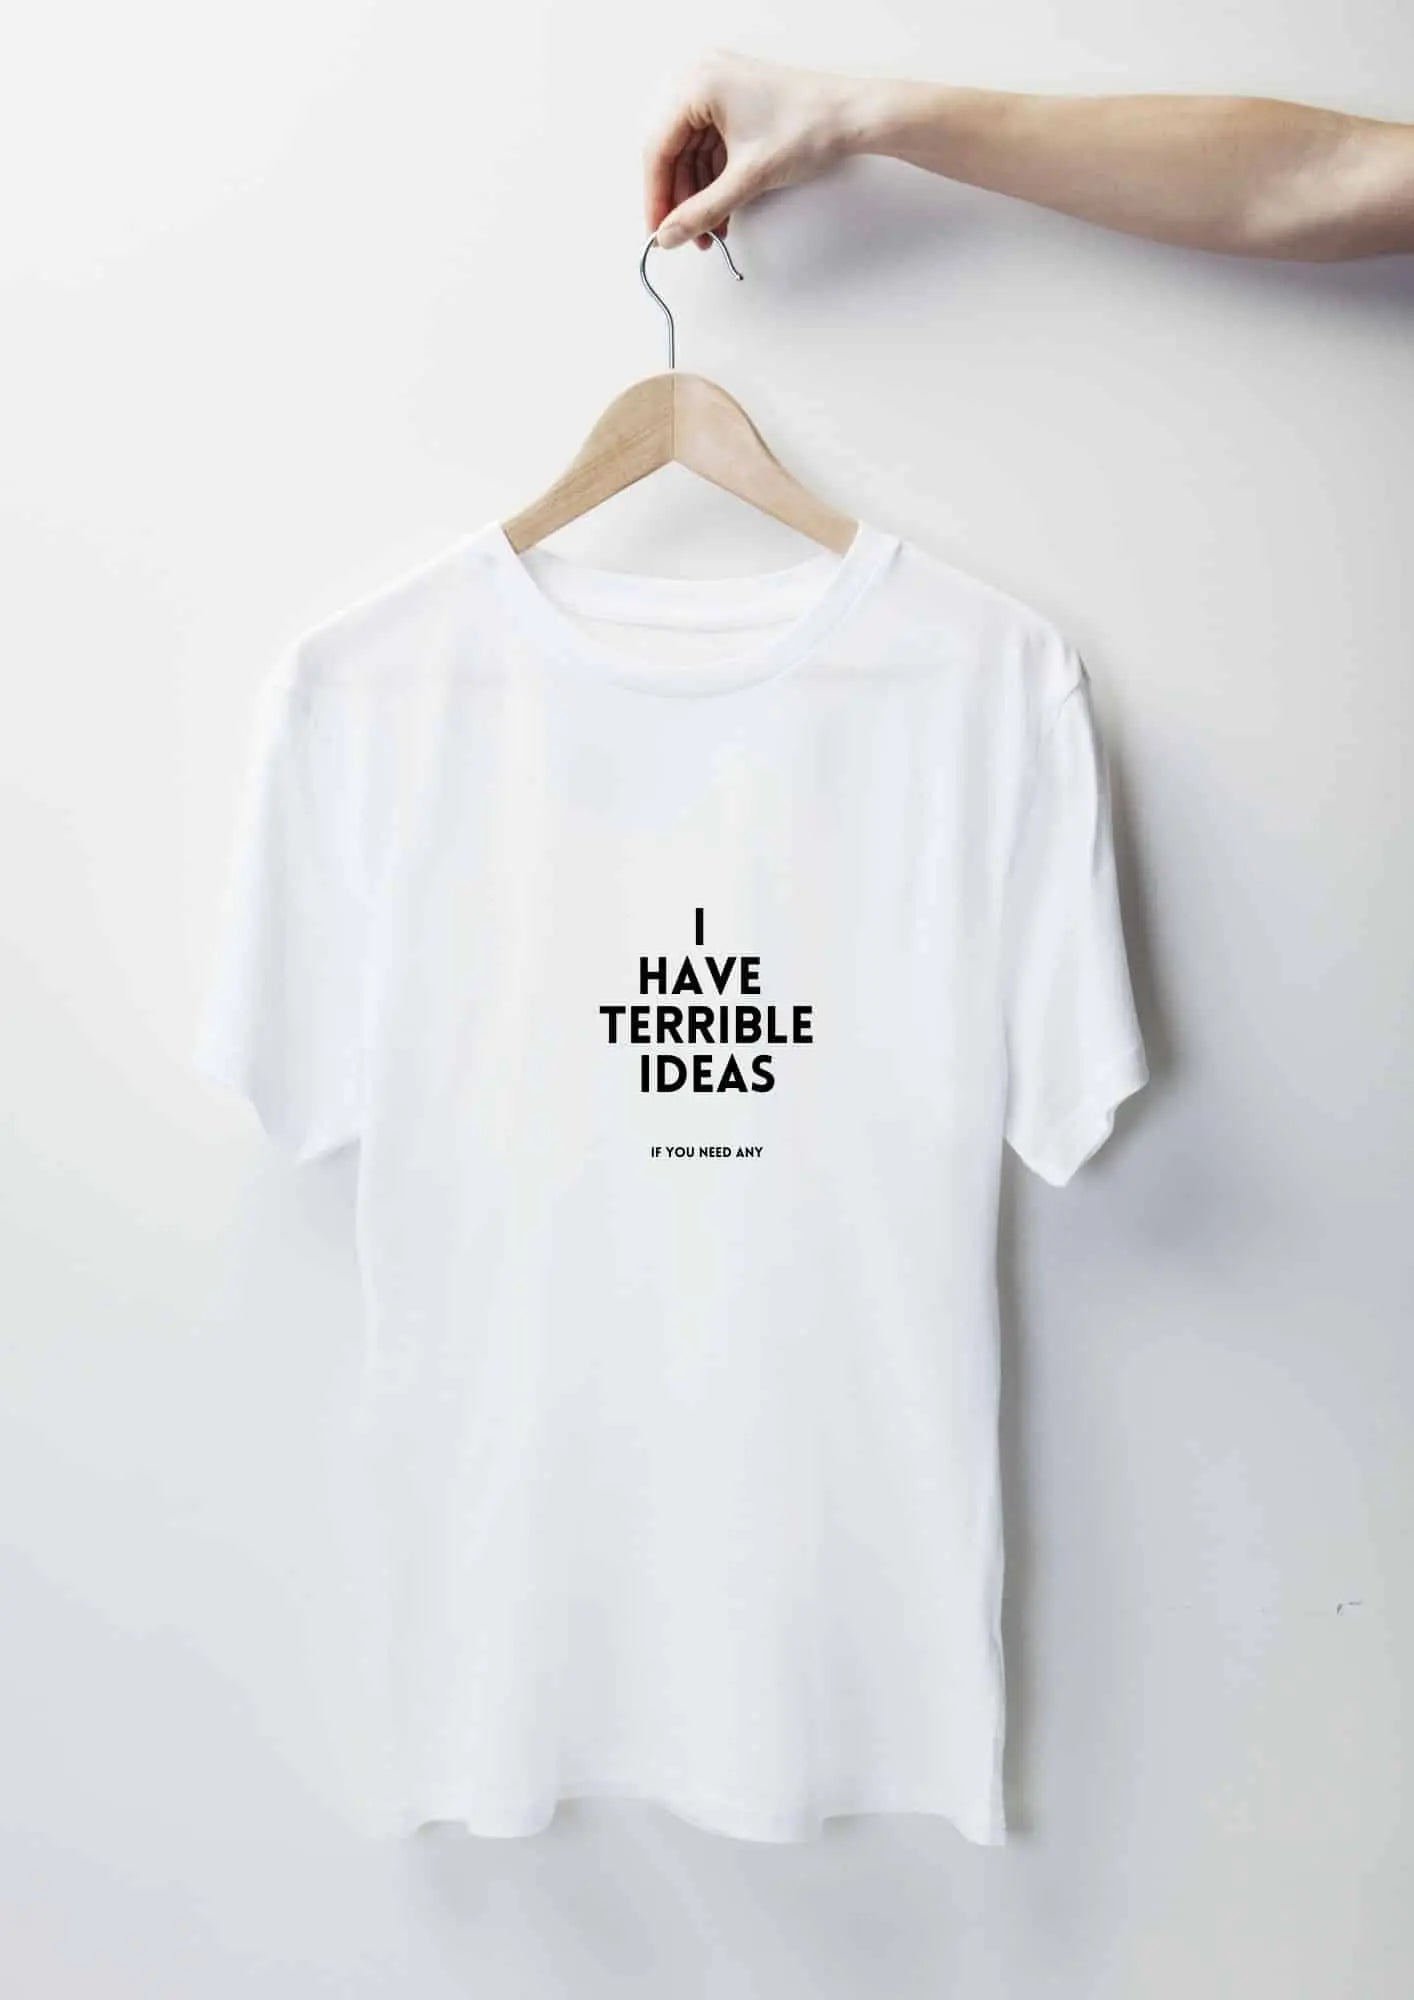 Oversized white t-shirt with black text I Have Terrible Ideas. Made of organic cotton. Features size chart for XS to XL. Washing instructions included.